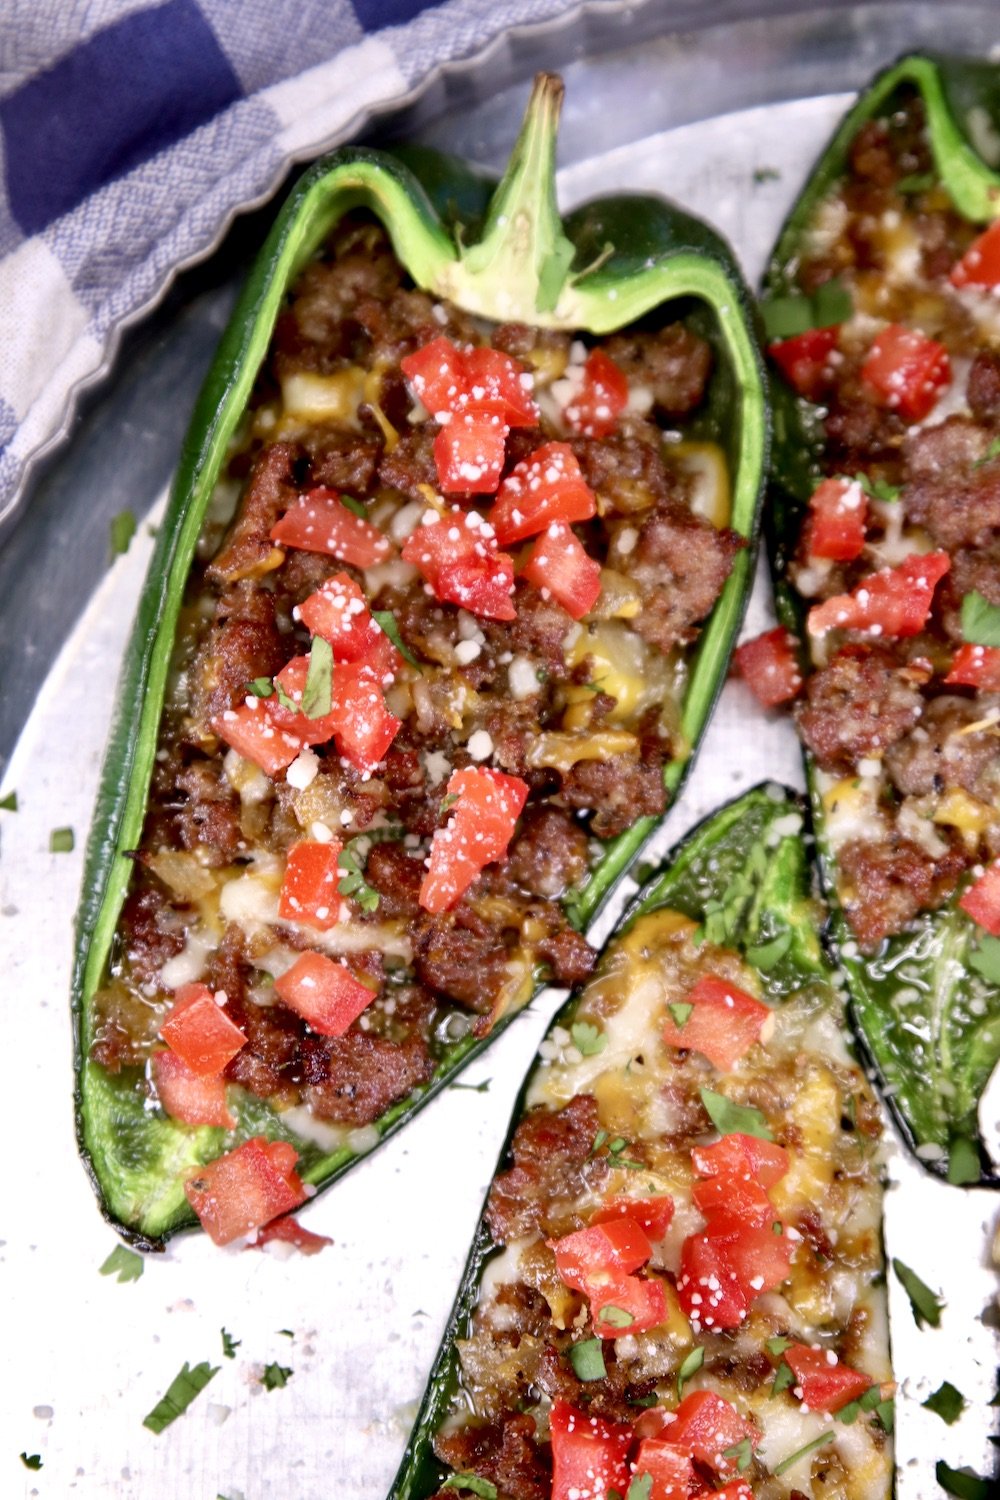 Stuffed poblano peppers with sausage, cheese and tomatoes on a platter